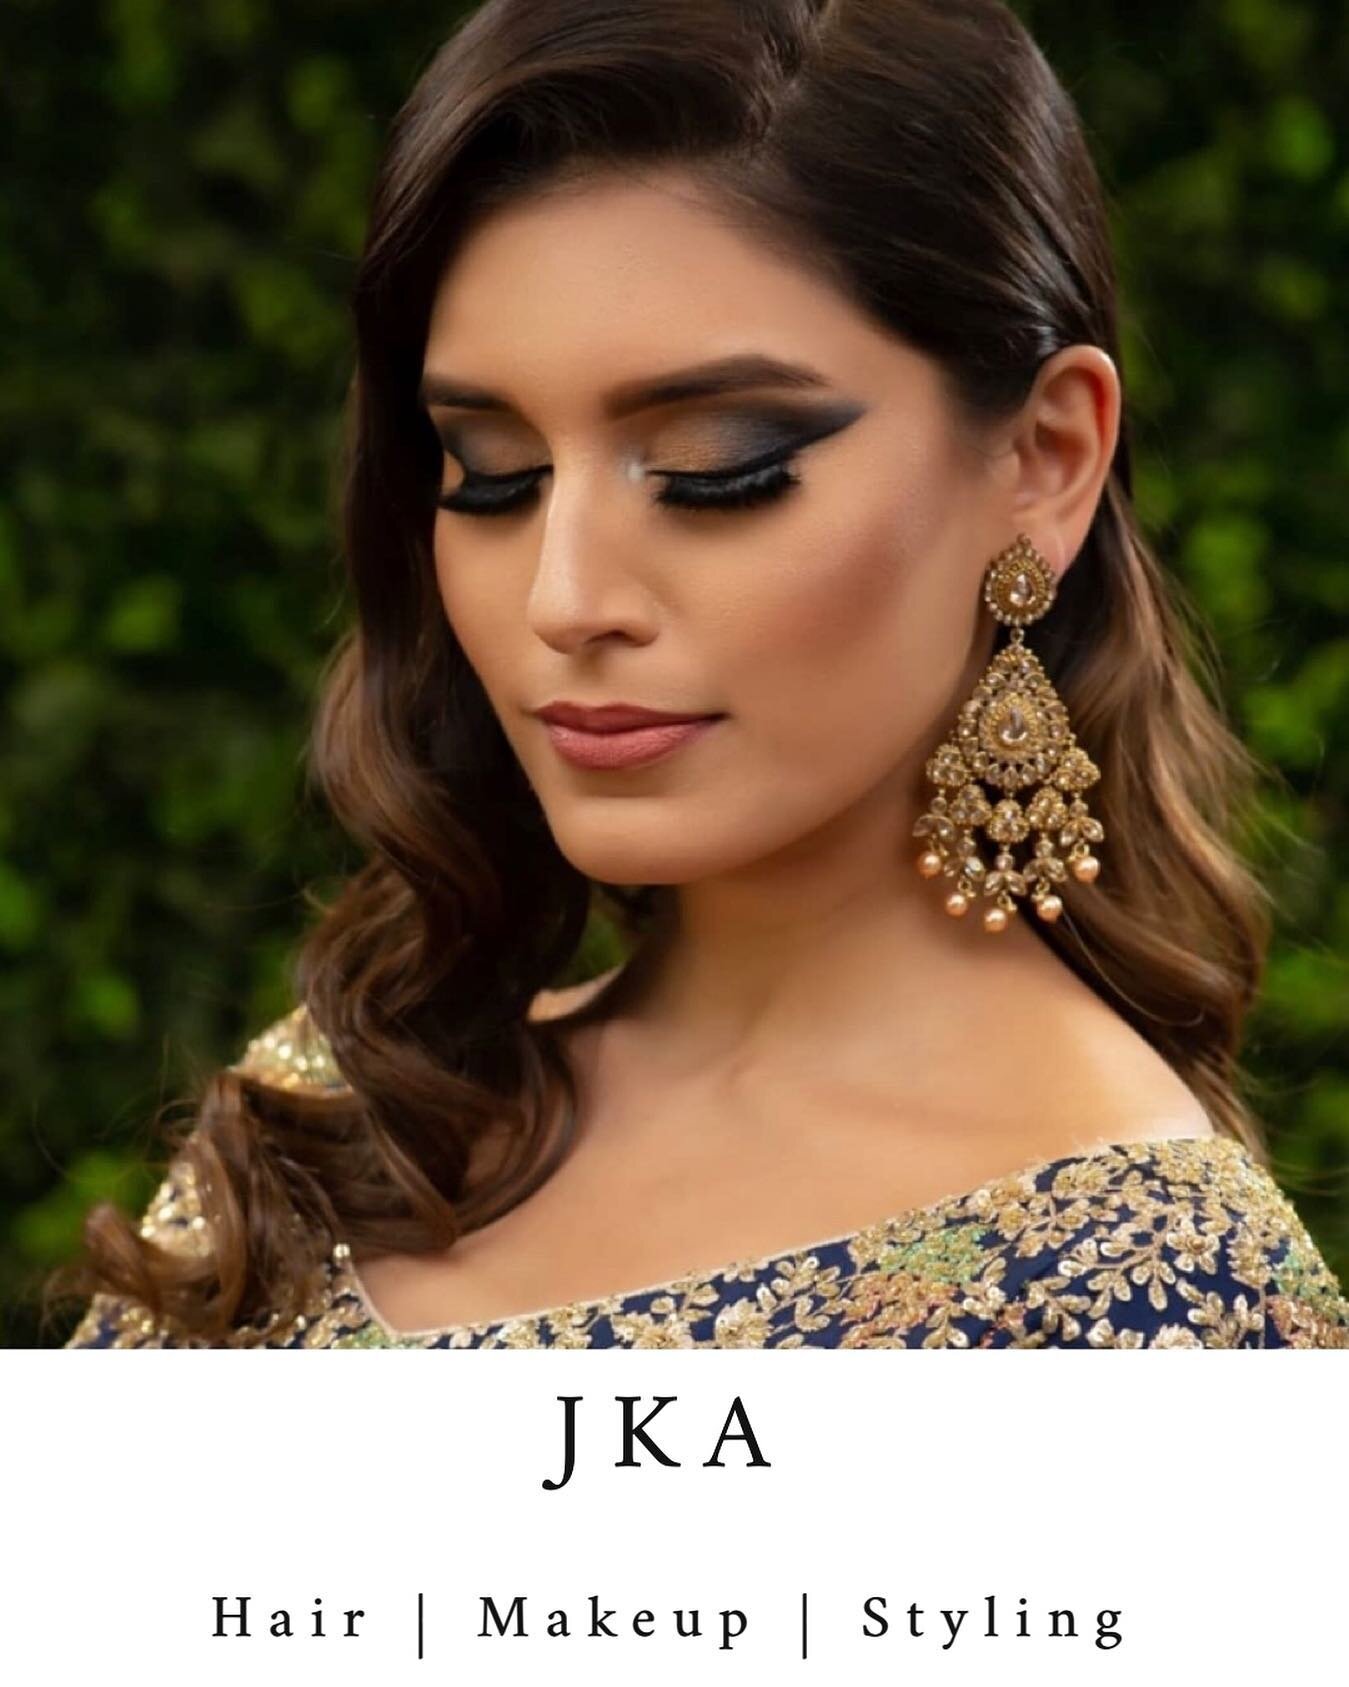 💄Stylist: JKA
📍Location: LEICESTER - available to travel ----------------------------------------------------------------------------------
To BOOK 👉🏽 Email us at promakeuplondonstylists@gmail.com -------------------------------------------------